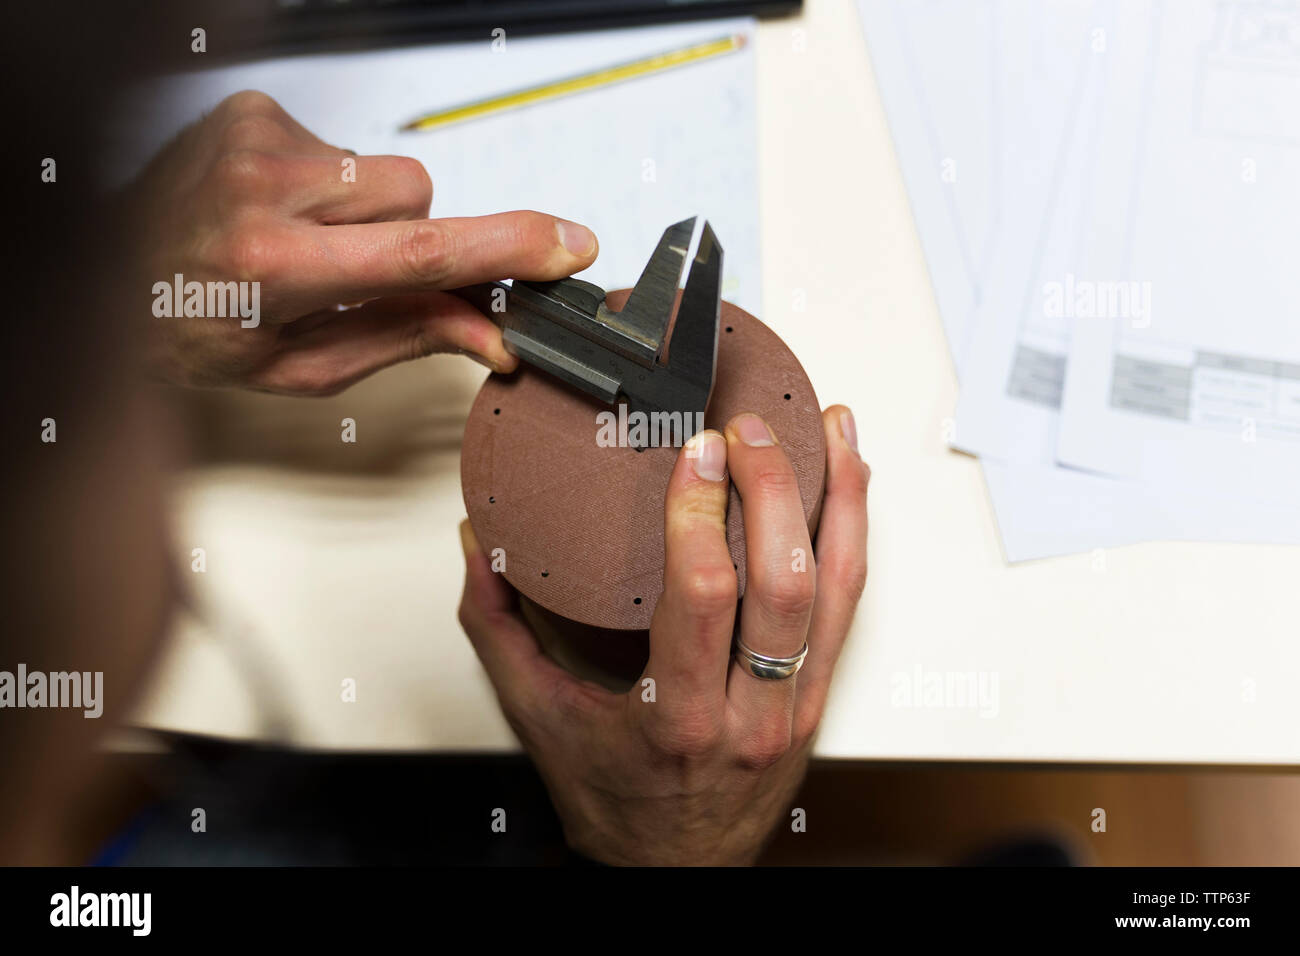 Cropped hands of engineer working on 3D printed design Stock Photo